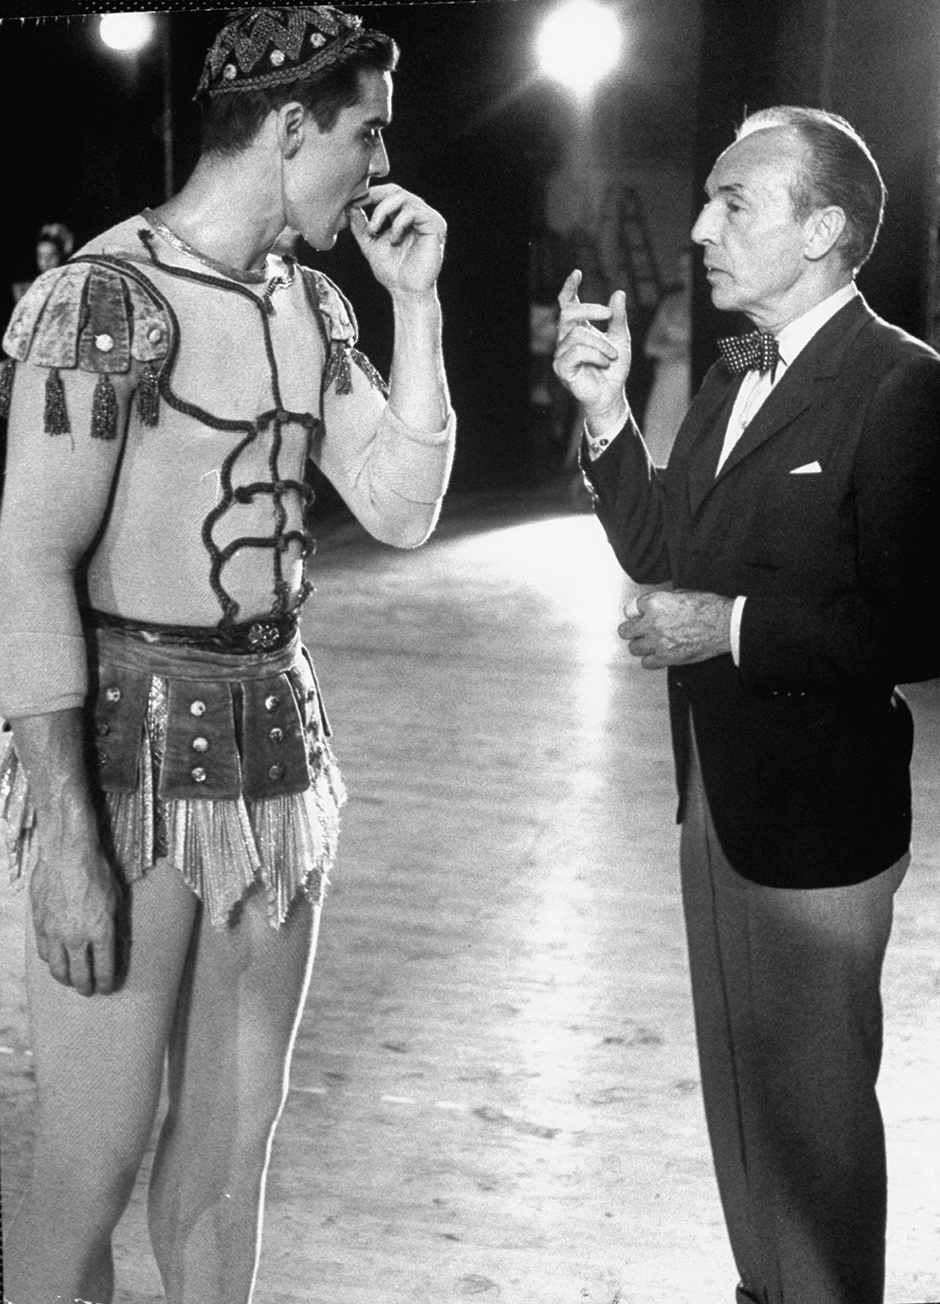 George Balanchine with ballet dancer Jacques d’Amboise on the set of A Midsummer Night’s Dream, circa 1963